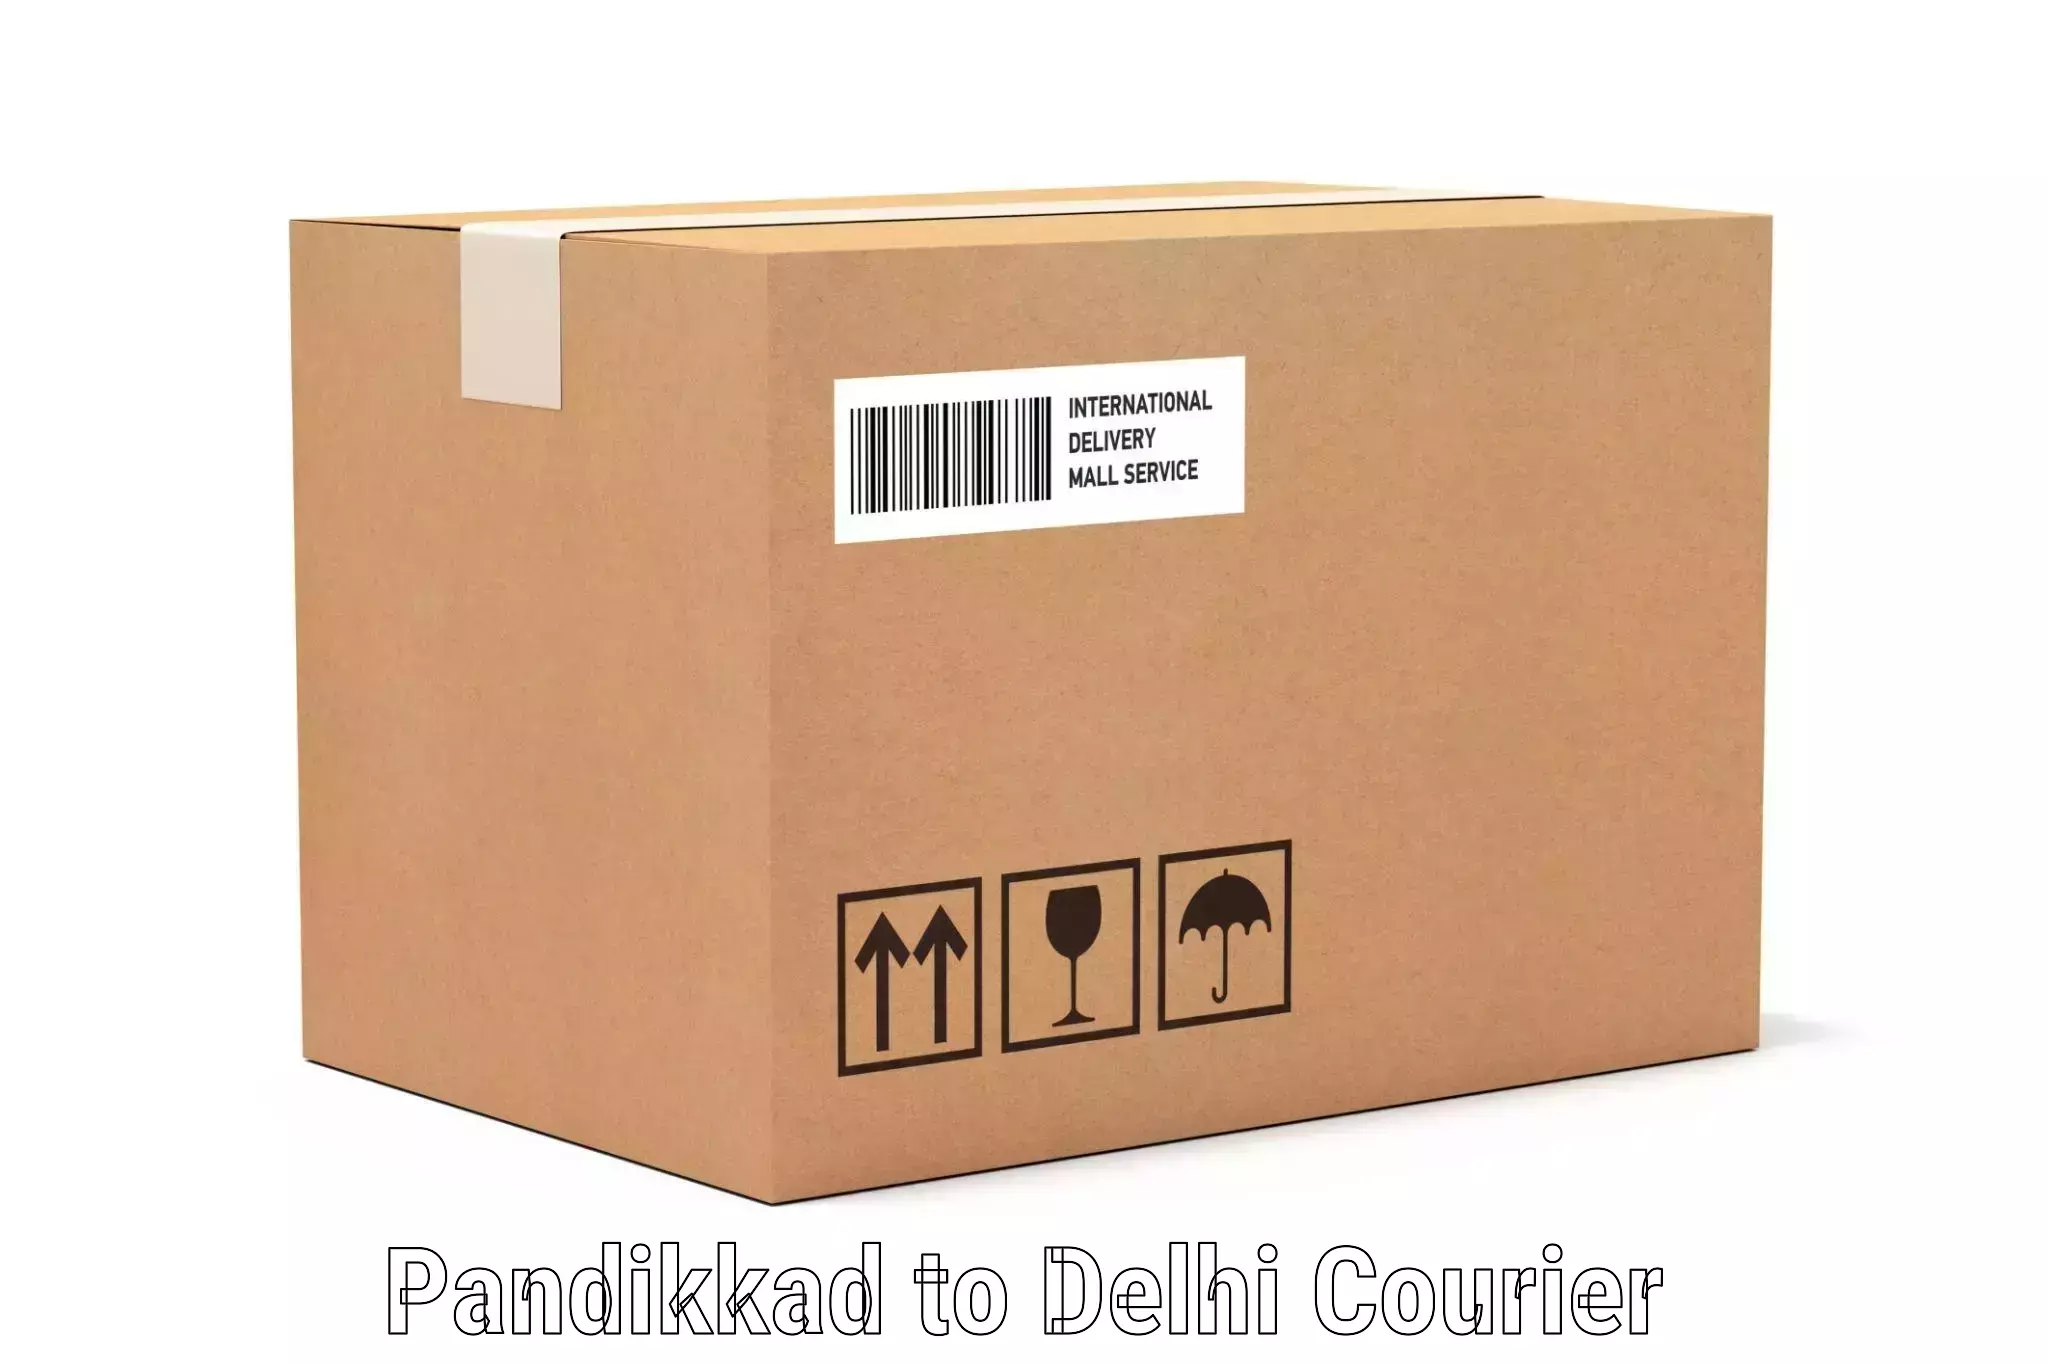 Luggage shipment specialists Pandikkad to NCR